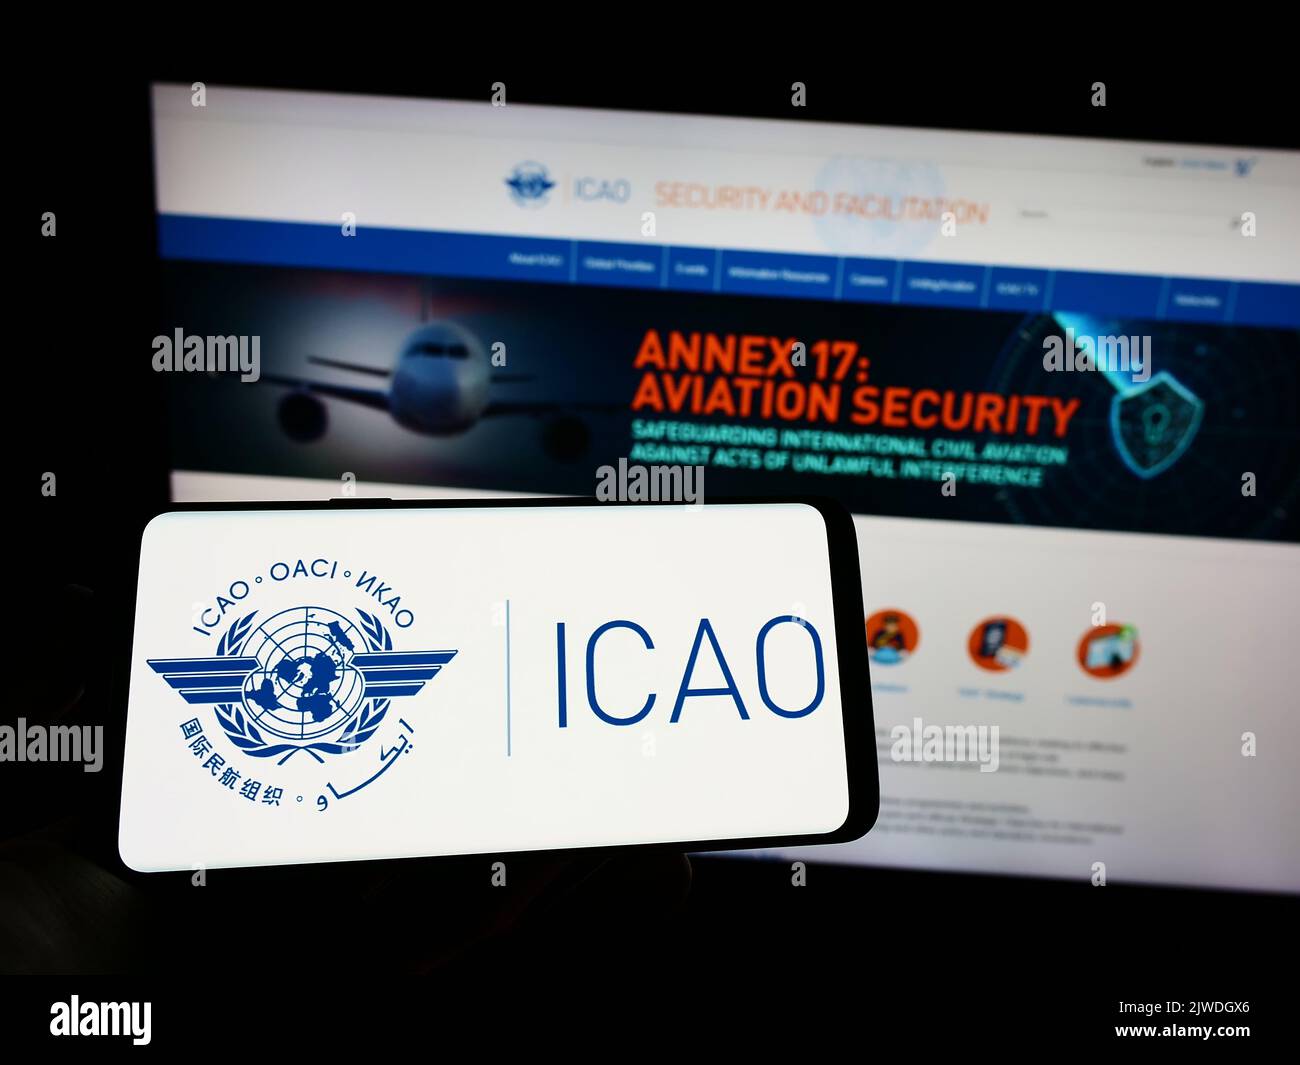 Person holding mobile phone with logo of International Civil Aviation Organization (ICAO) on screen in front of web page. Focus on phone display. Stock Photo